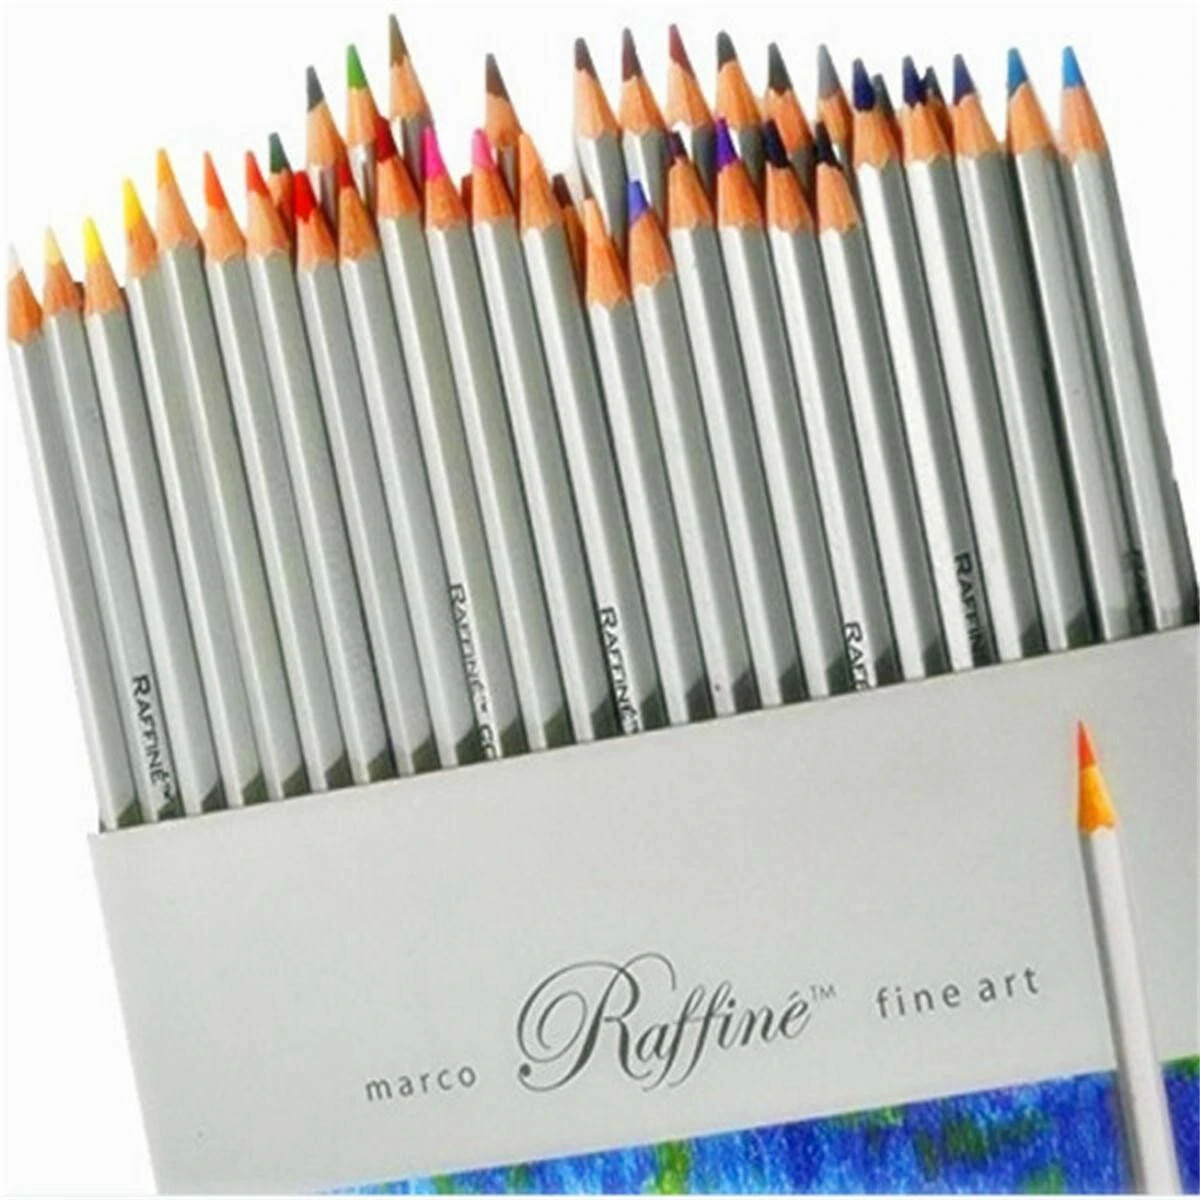 72 colors art drawing pencil set oil non-toxic pencils painting sketching drawing stationery school students supplies